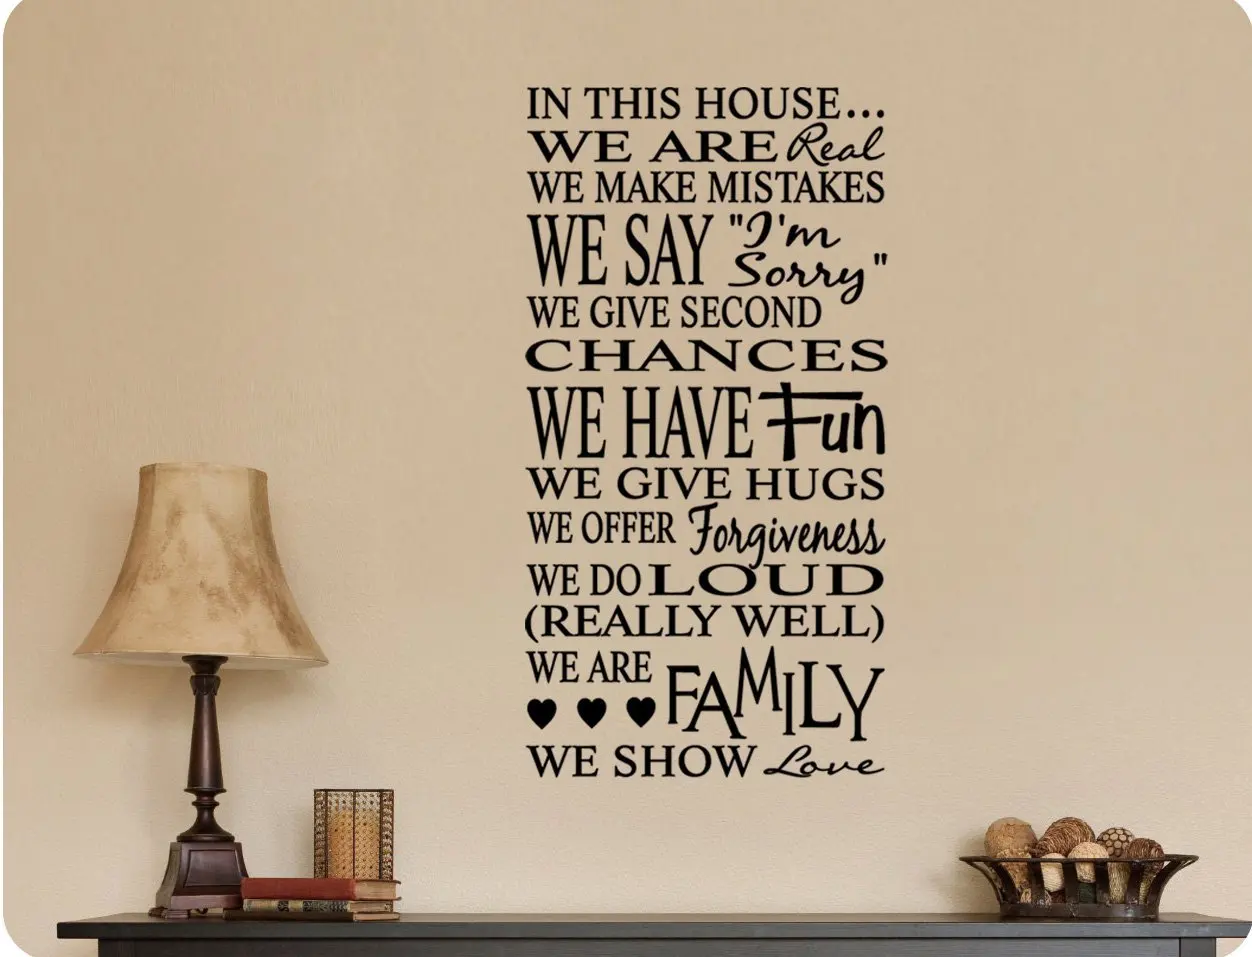 In this House we are real. Картинки с наклейки in this House we real we do mistakes. In this House we give a hug.